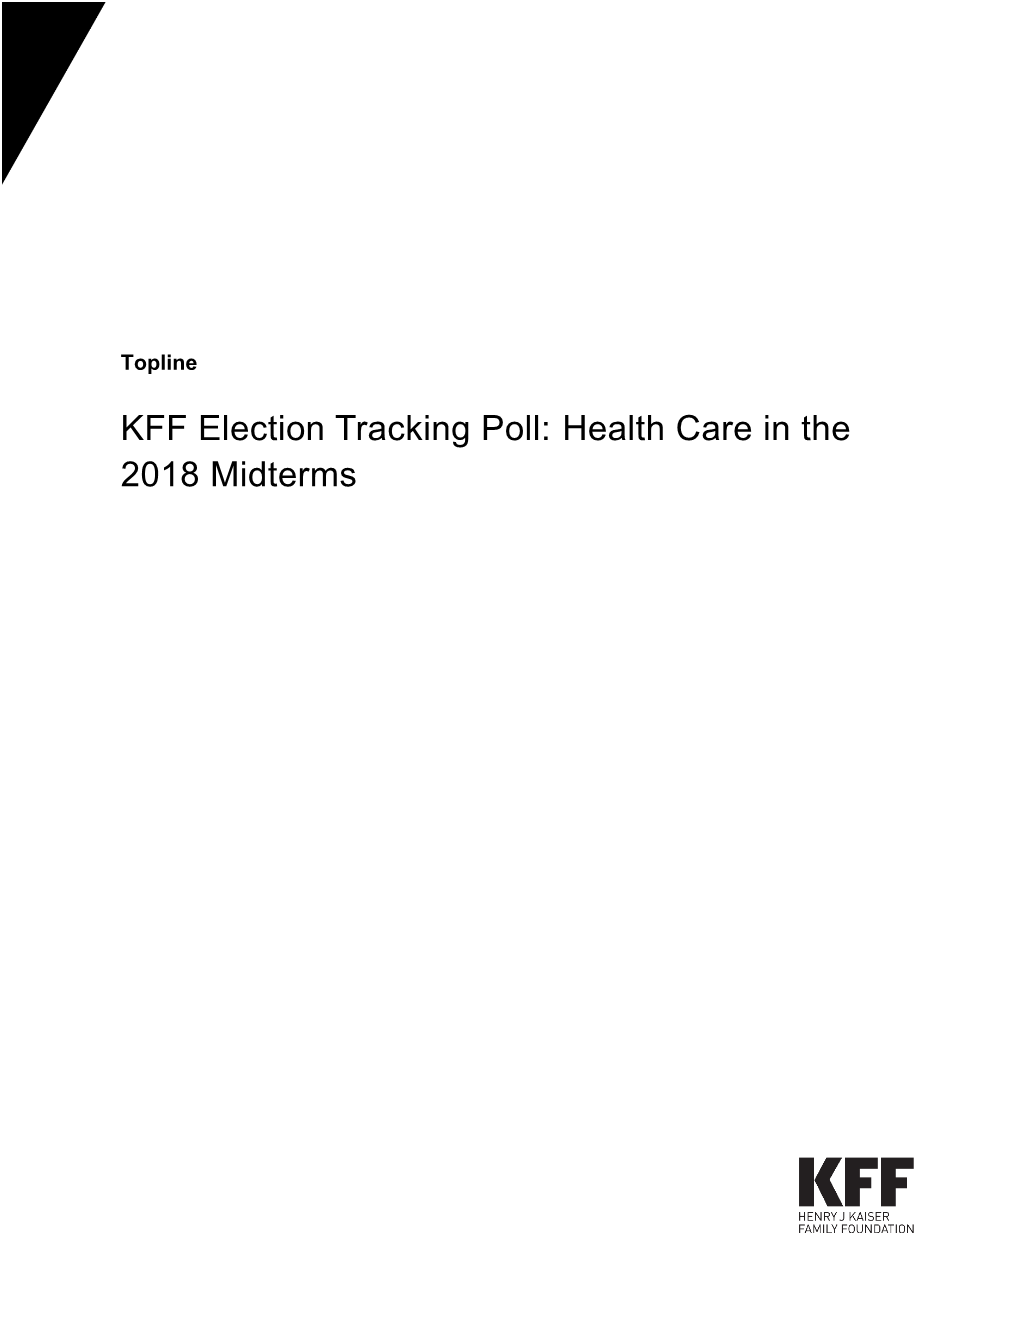 KFF Election Tracking Poll: Health Care in the 2018 Midterms